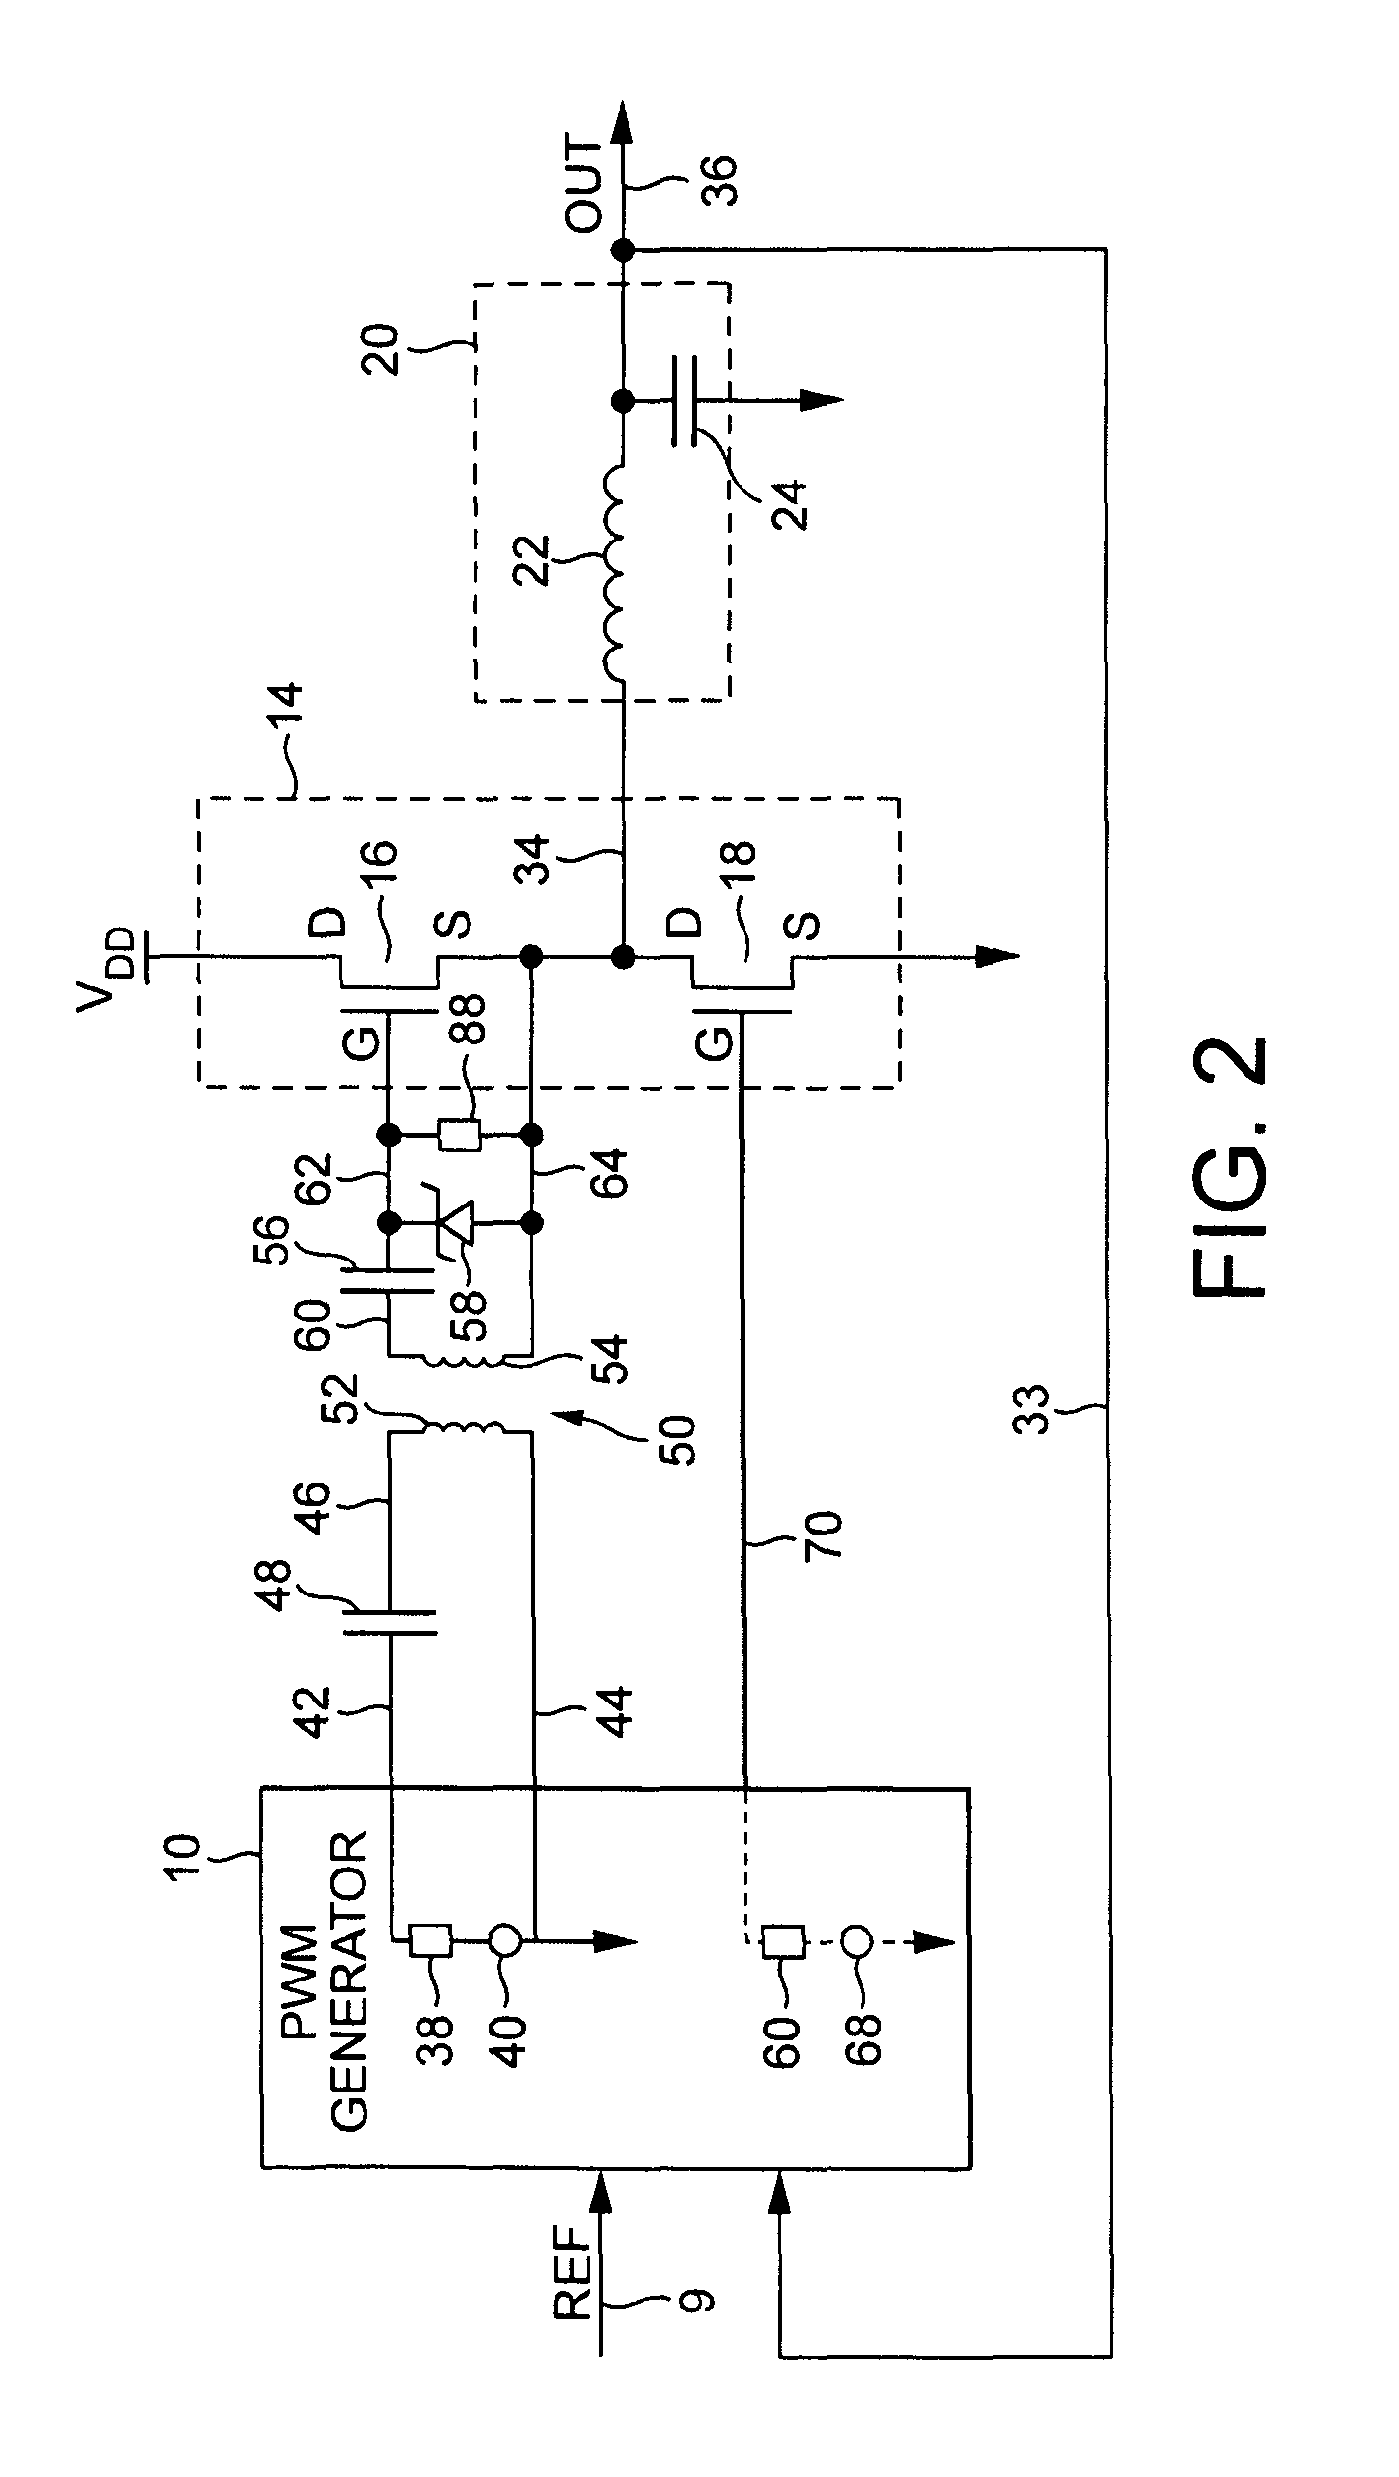 Switch mode power supply for envelope tracking